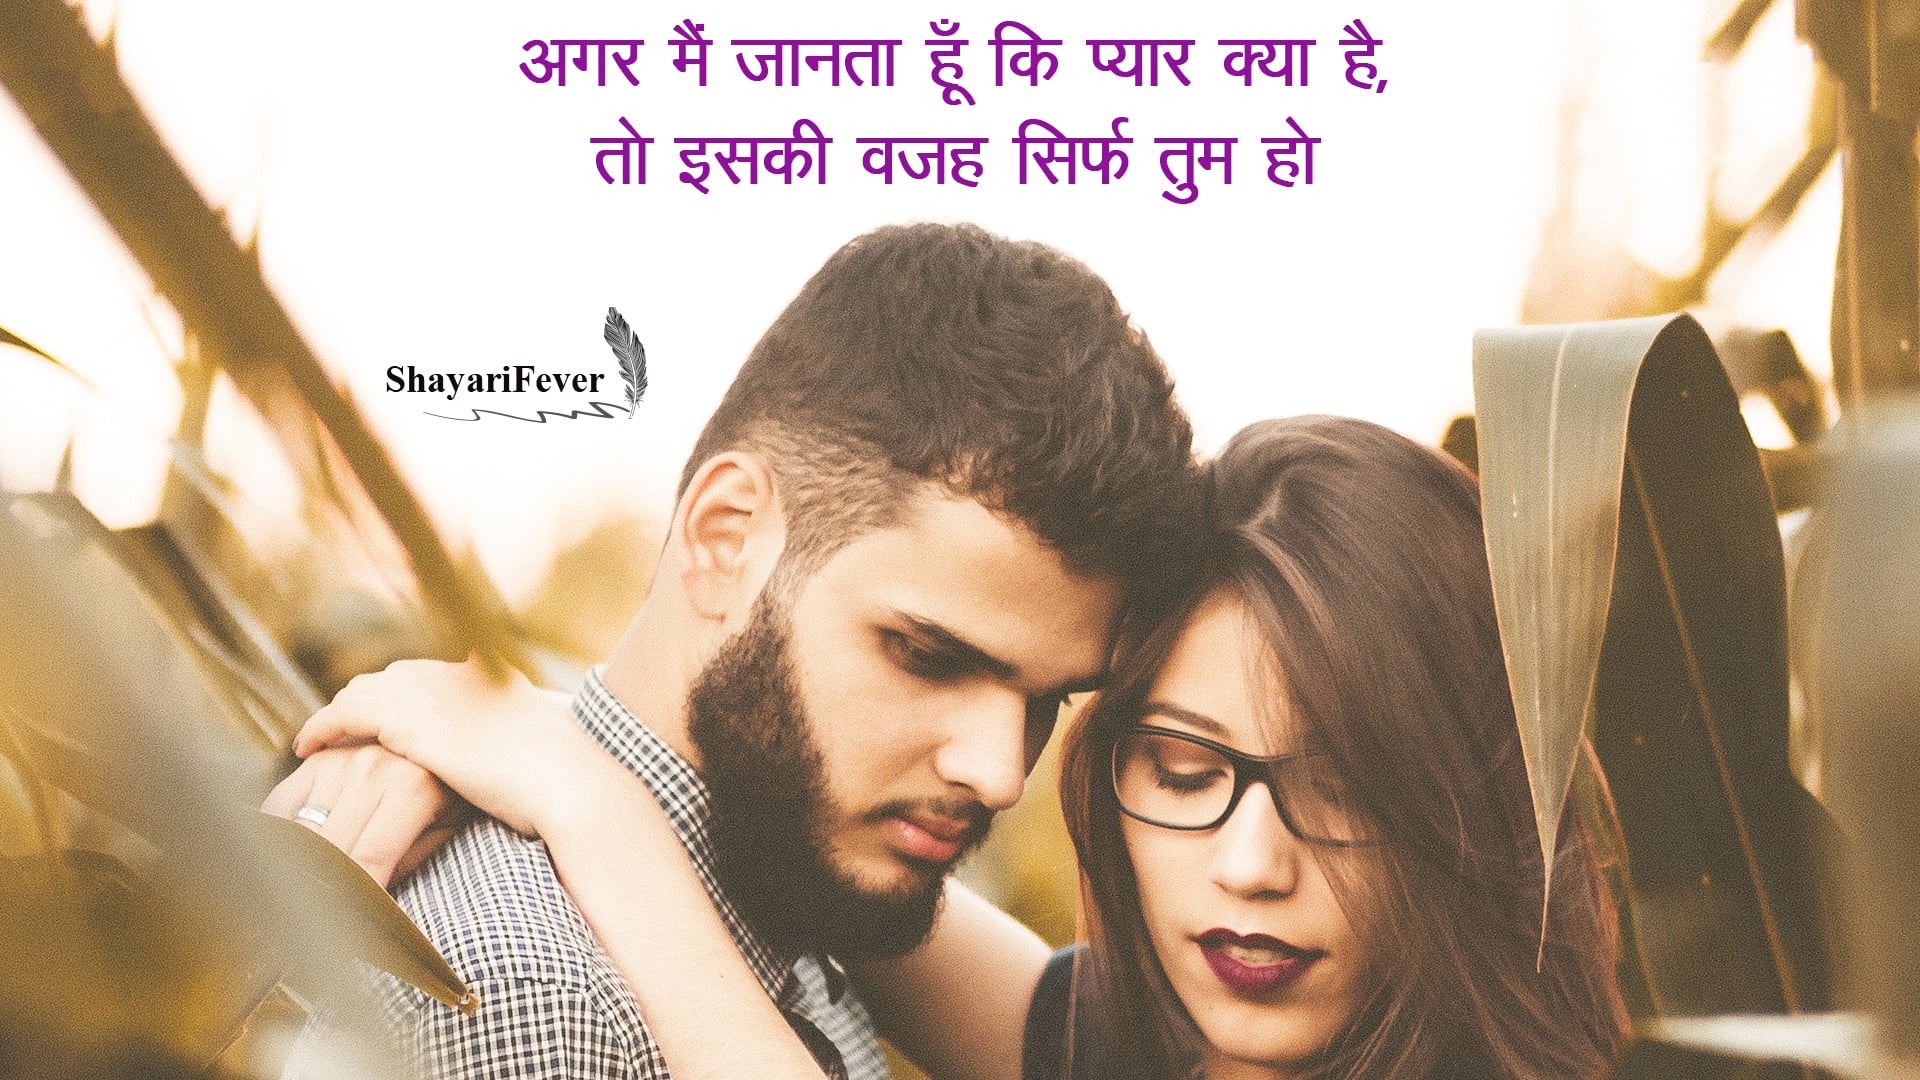 Girlfriend i for hindi love quotes you in I Love